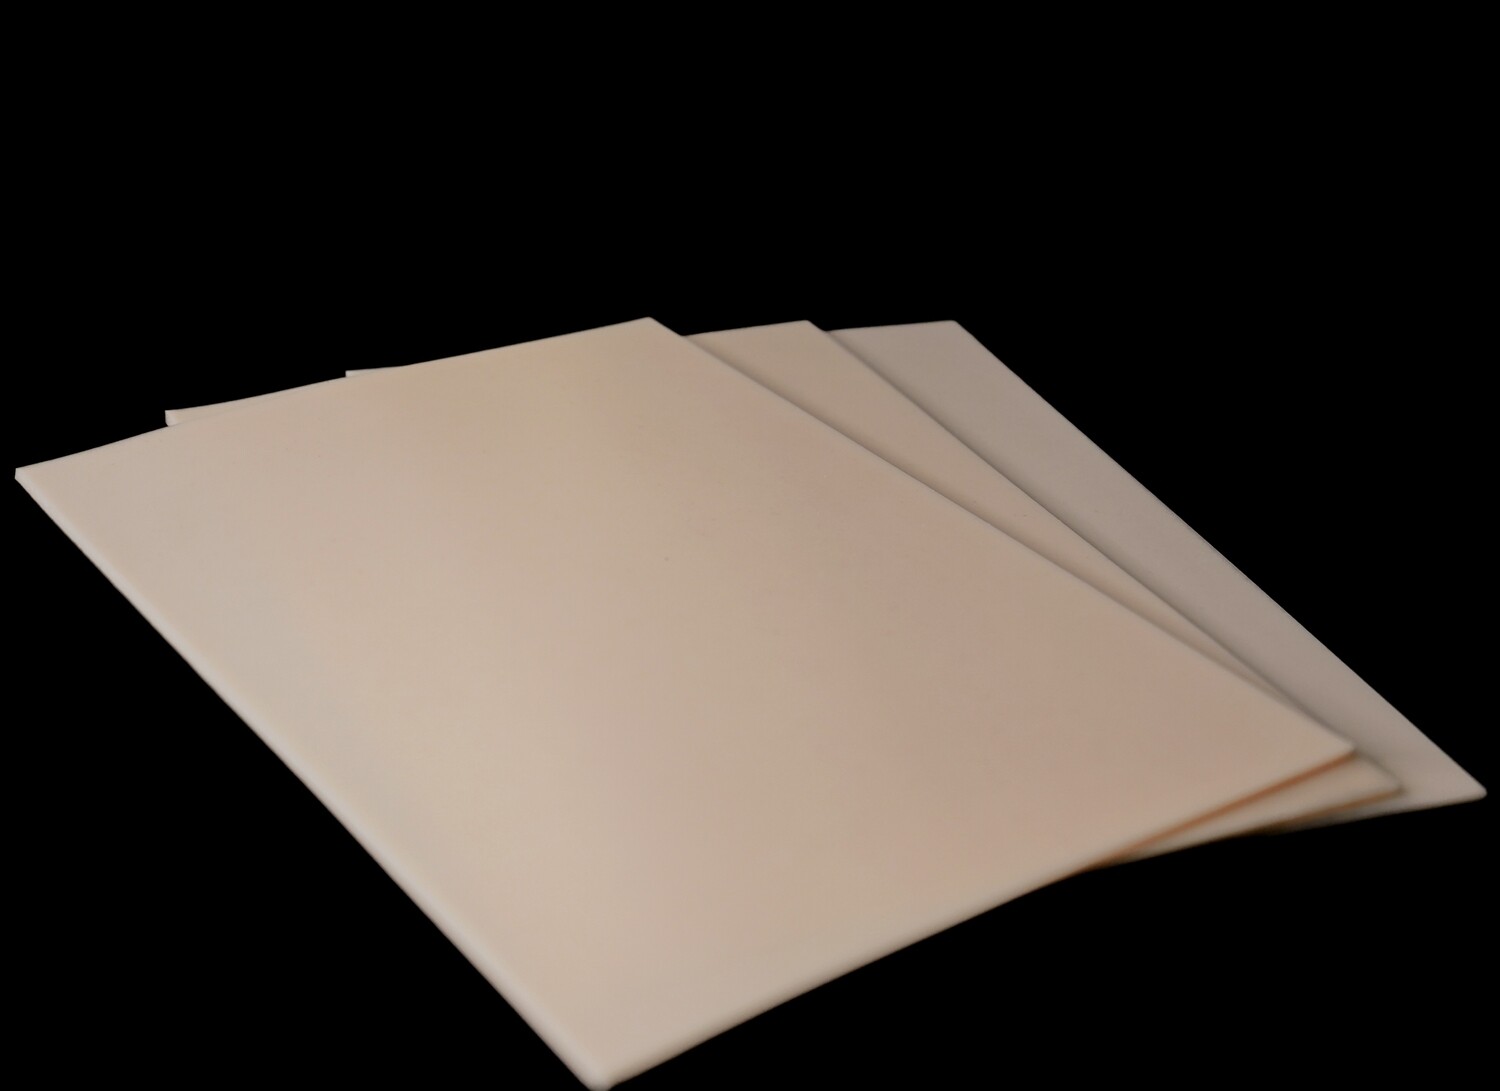 3 x A5 Reelskin sheet £19.99 (discount codes not applicable to this offer)